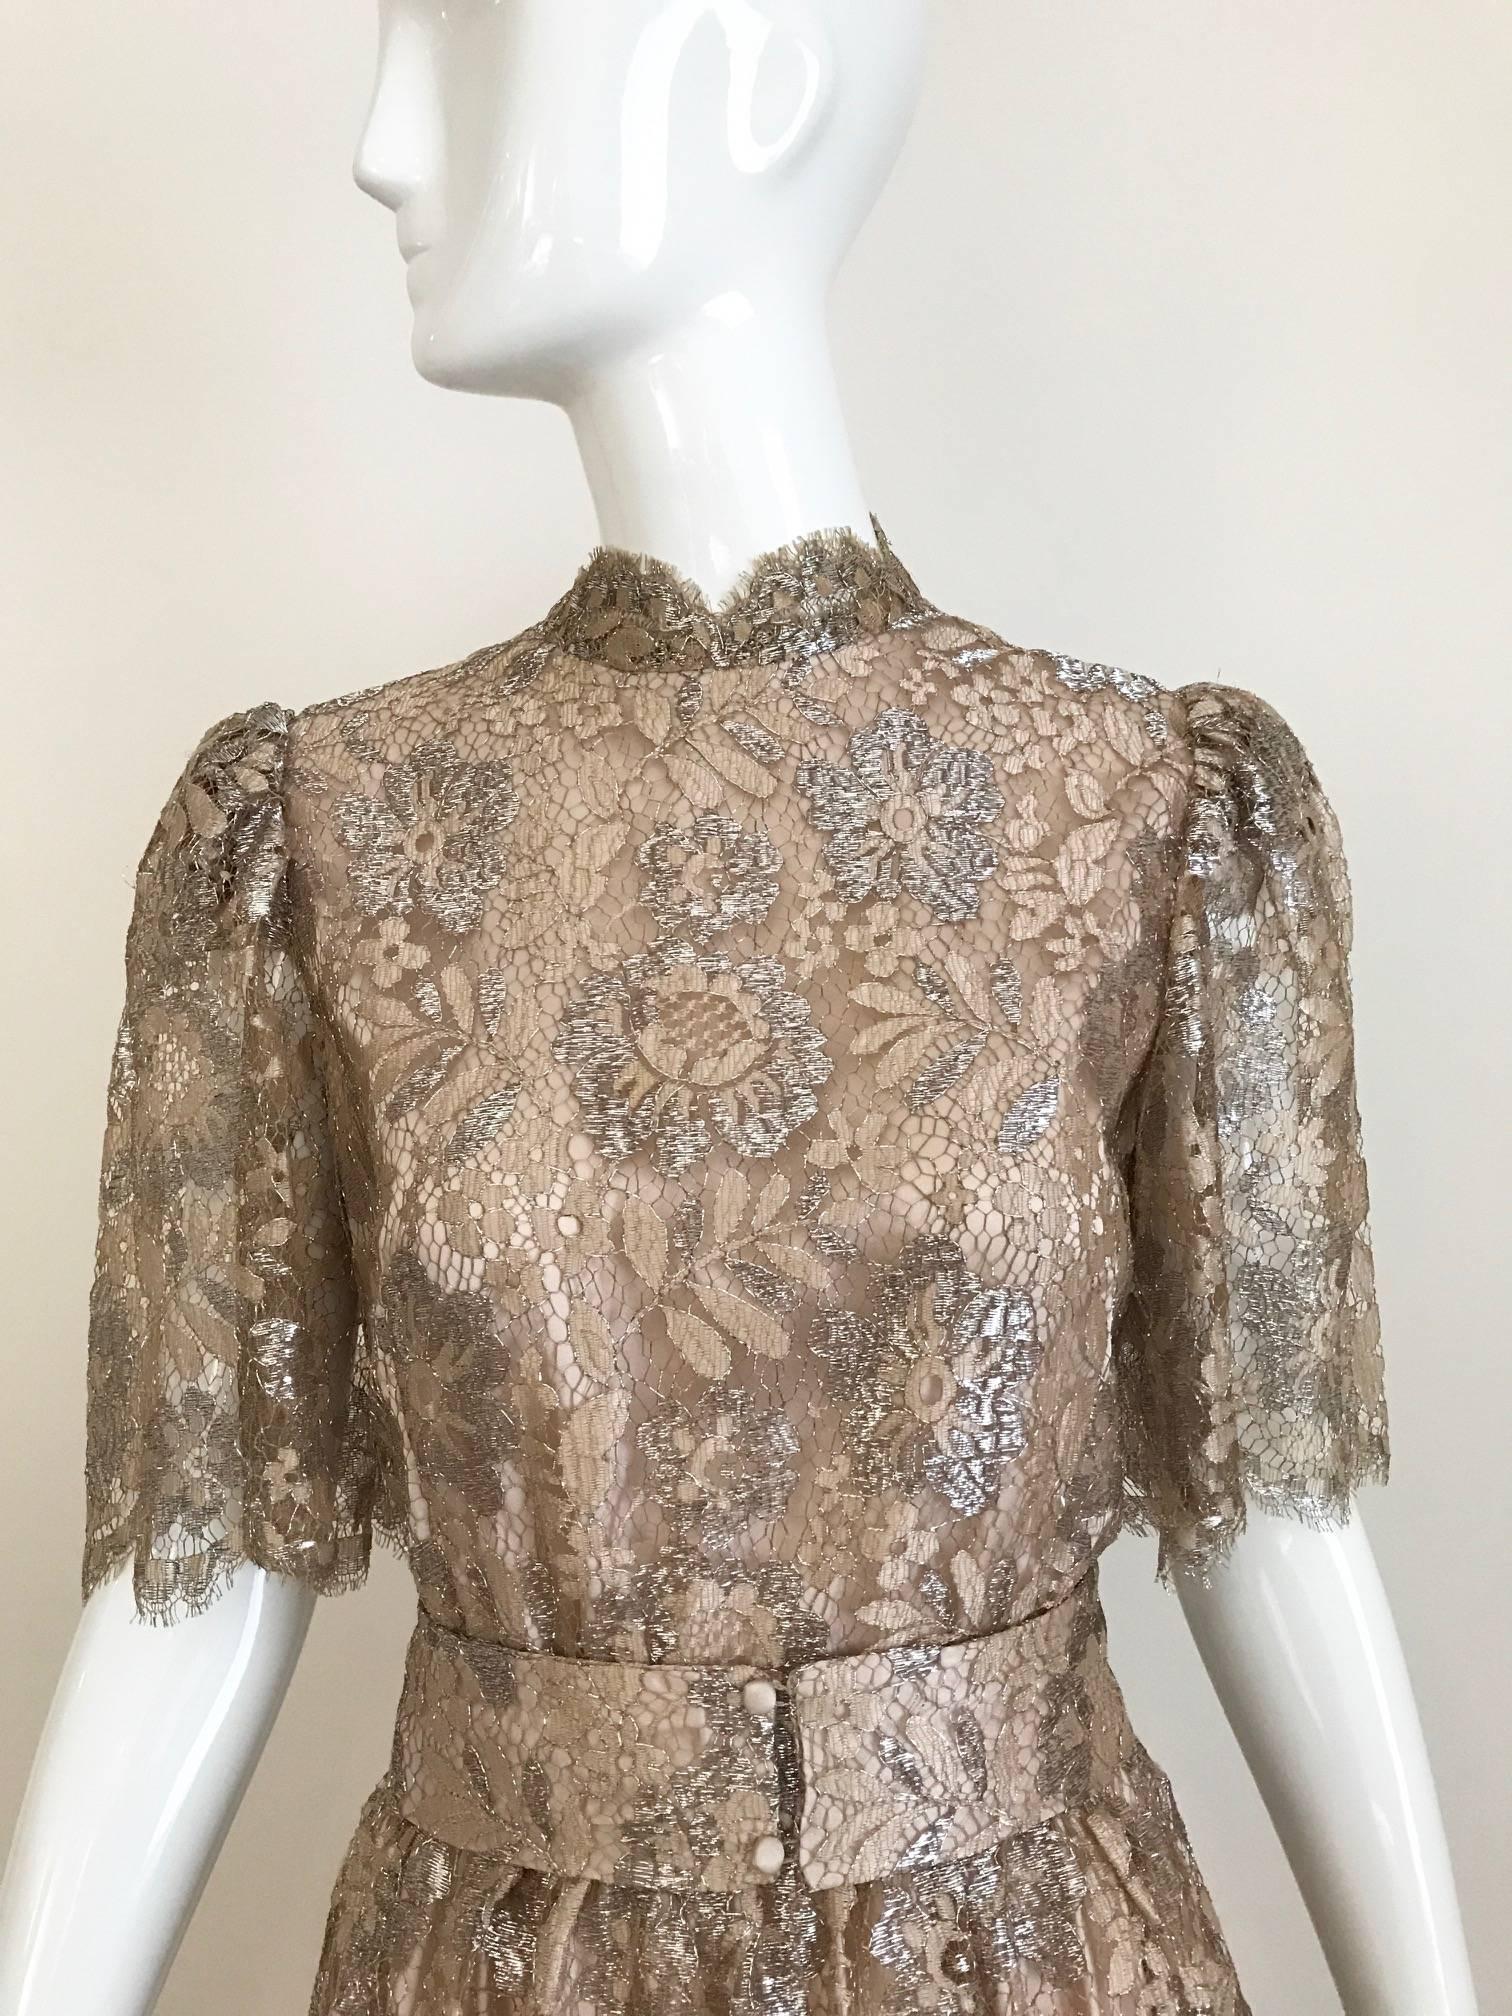 Vintage light gold metallic lace 3 tiered cocktail dress.  Dress comes with belt. 
Dress is in excellent condition.
Size Small
BUST: 34 INCHES
WAIST: 26 INCHES/  DRESS LENGTH: 48 INCHES